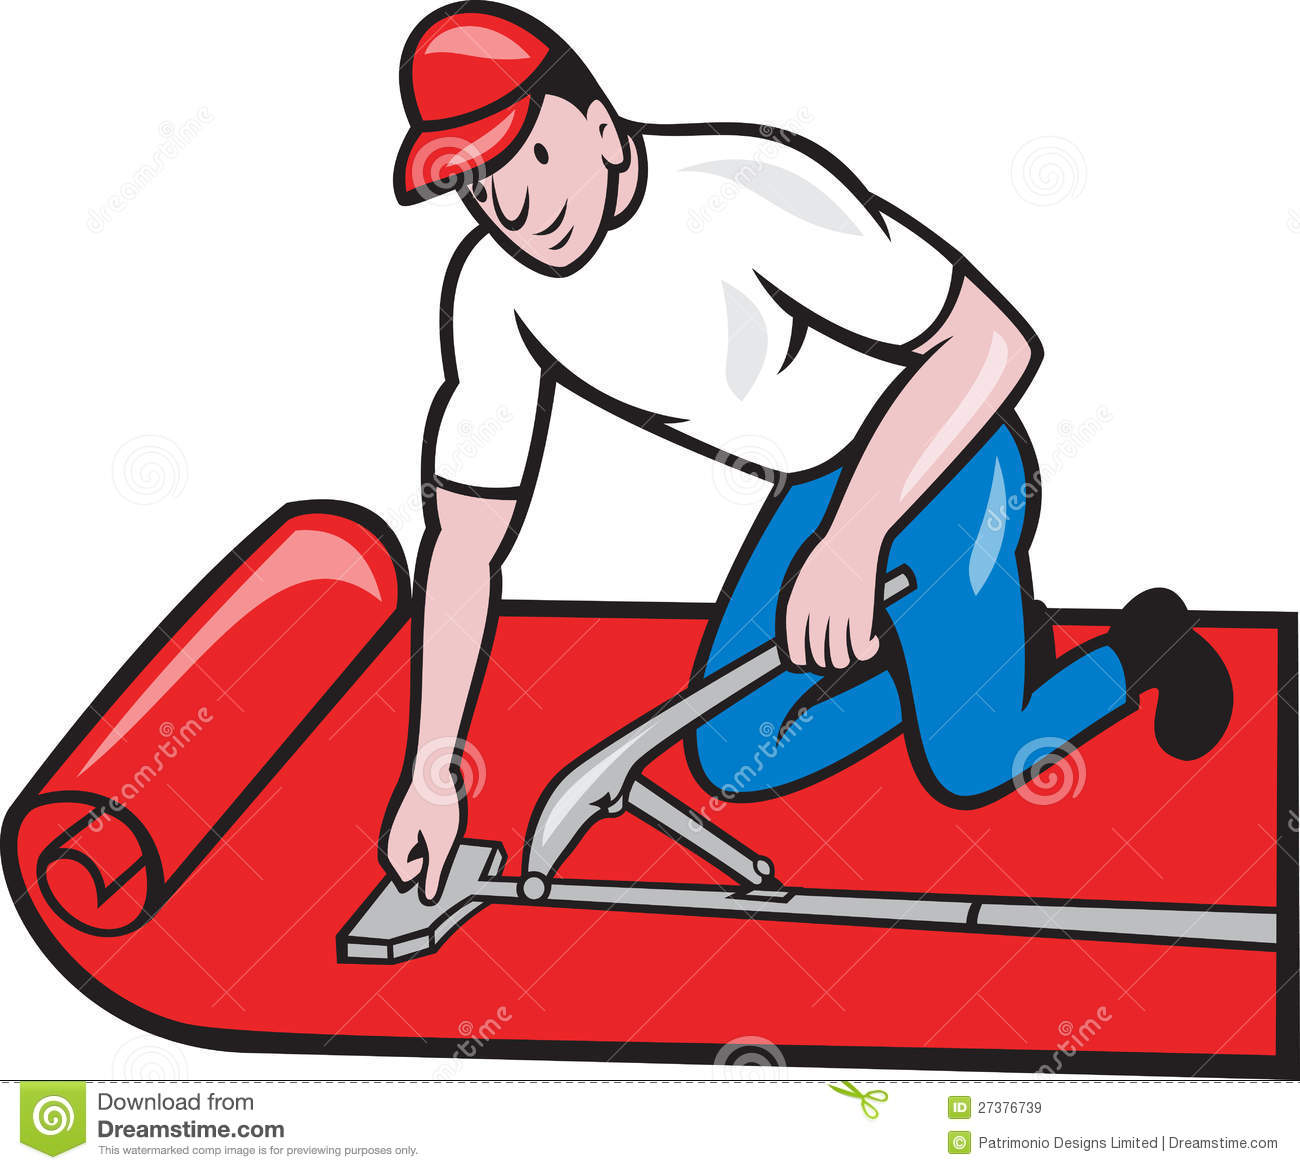 Illustration Of A Carpet Layer Laying Down Carpet Layer Carpet Fitter